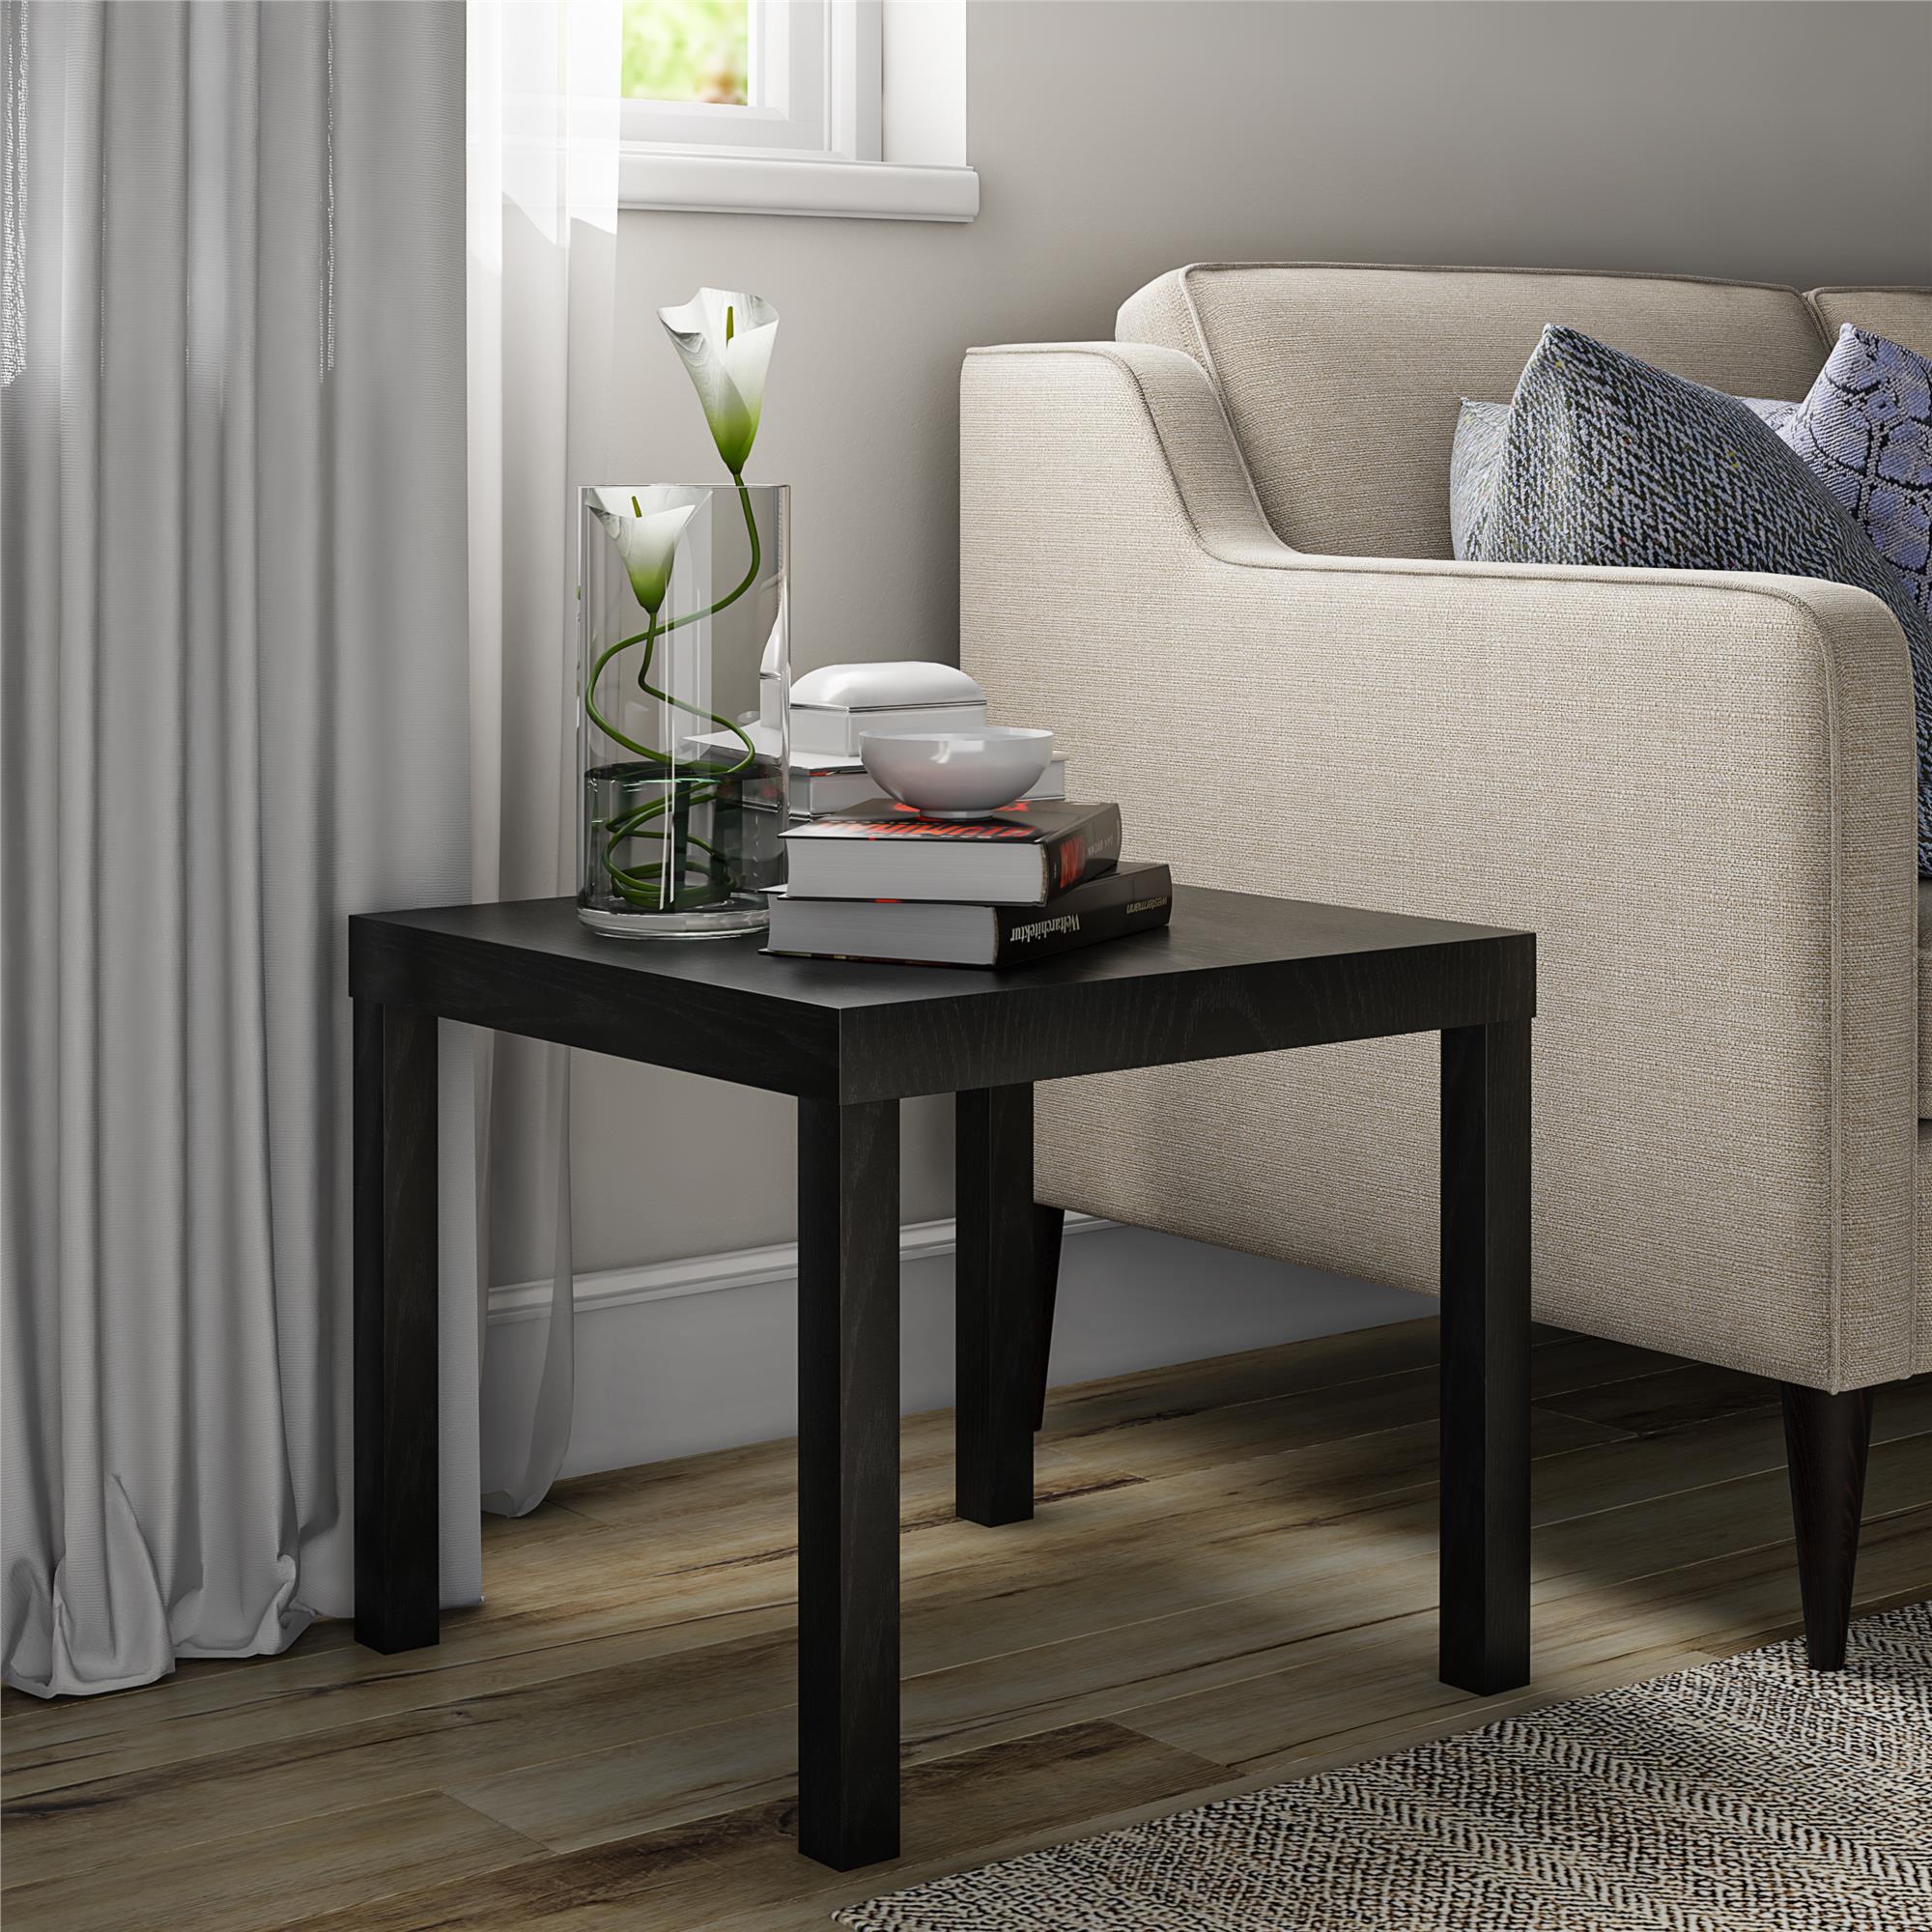 Mainstays Parson's End Table, Black - image 1 of 8